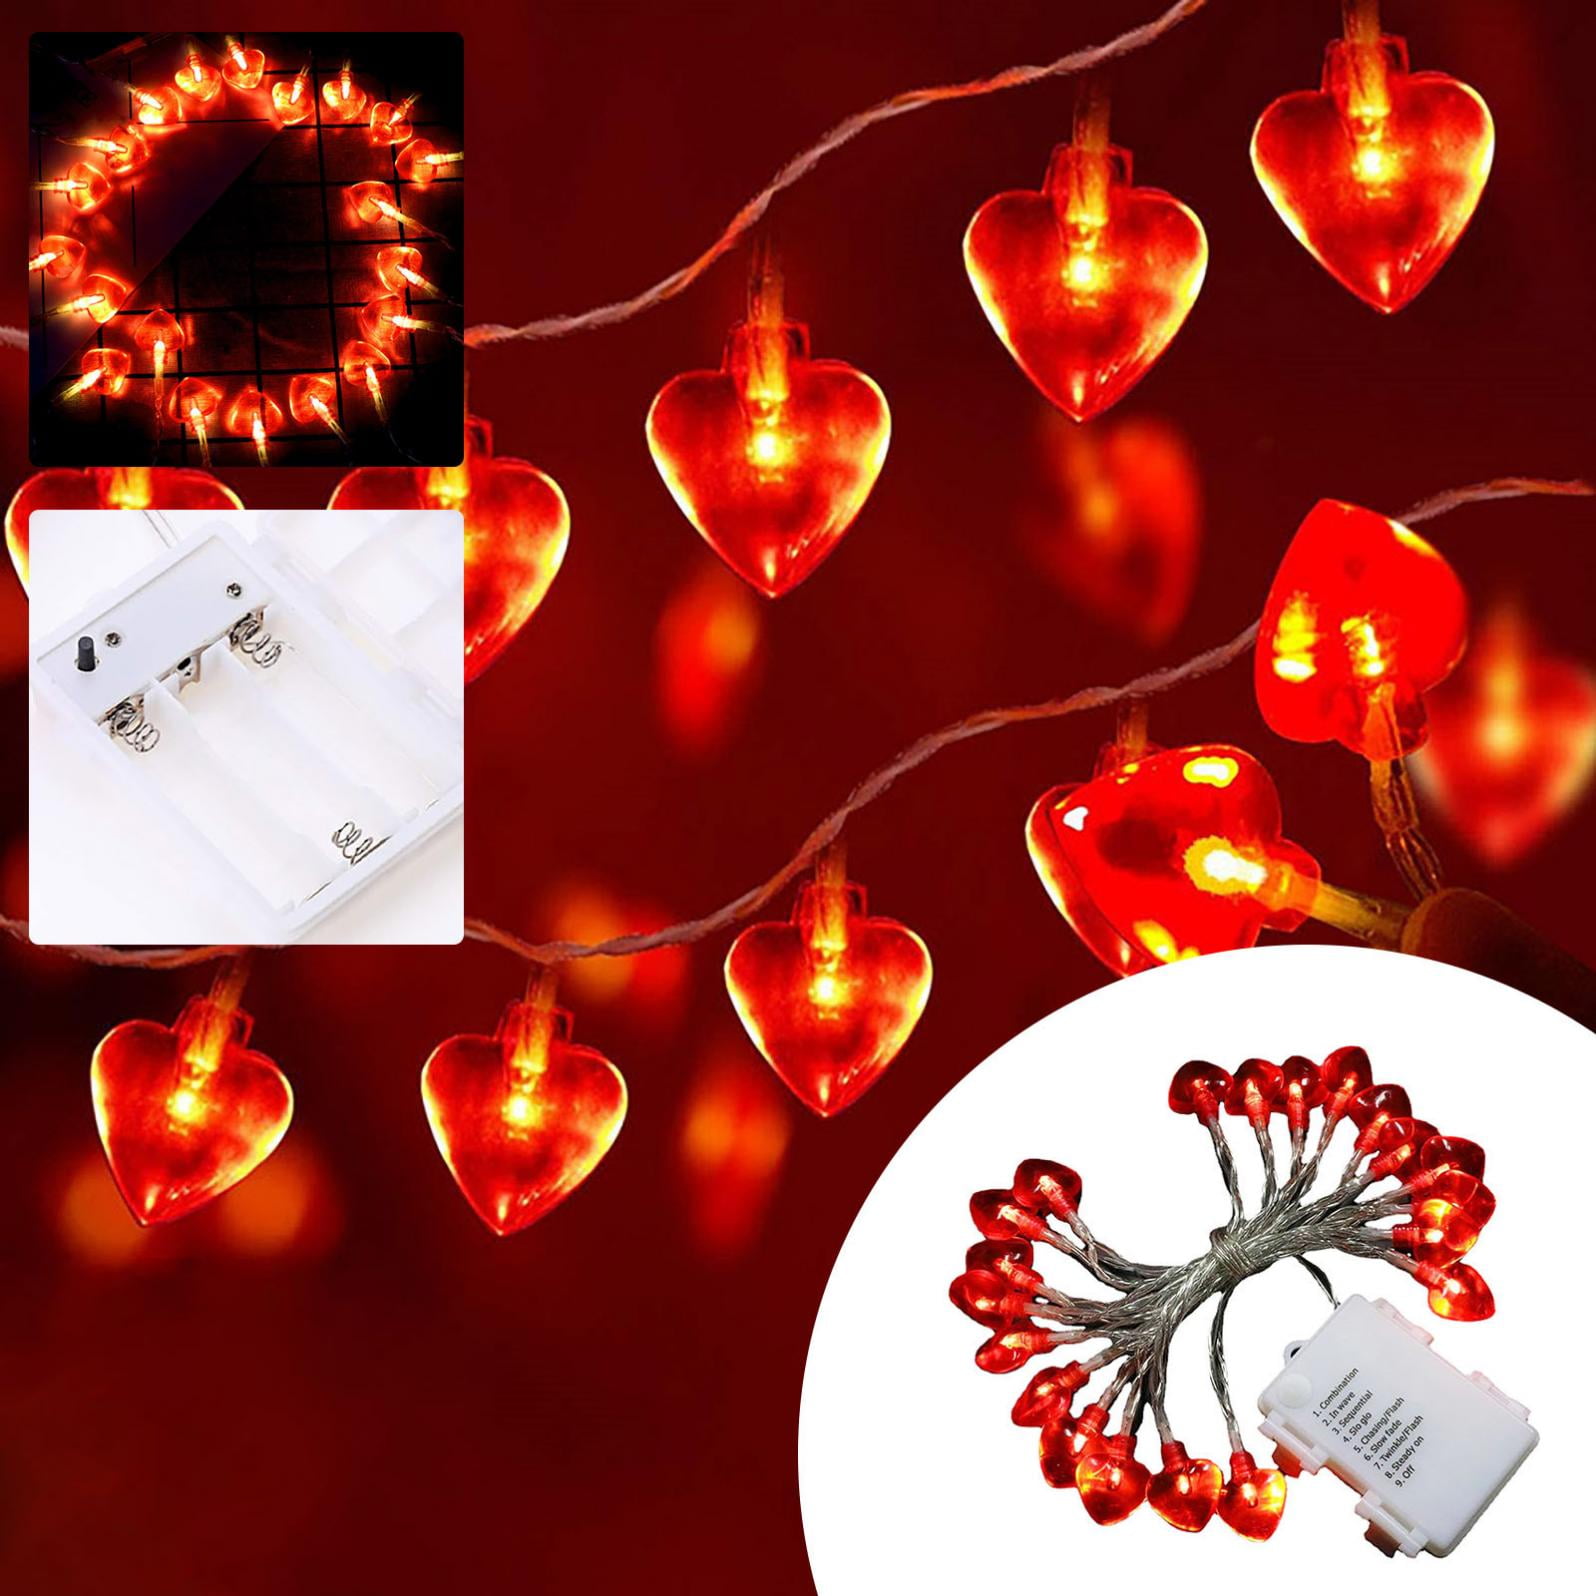 128 LED Heart-Shape Fairy String Curtain Light Valentine's Party Day QA Wed Z1H5 